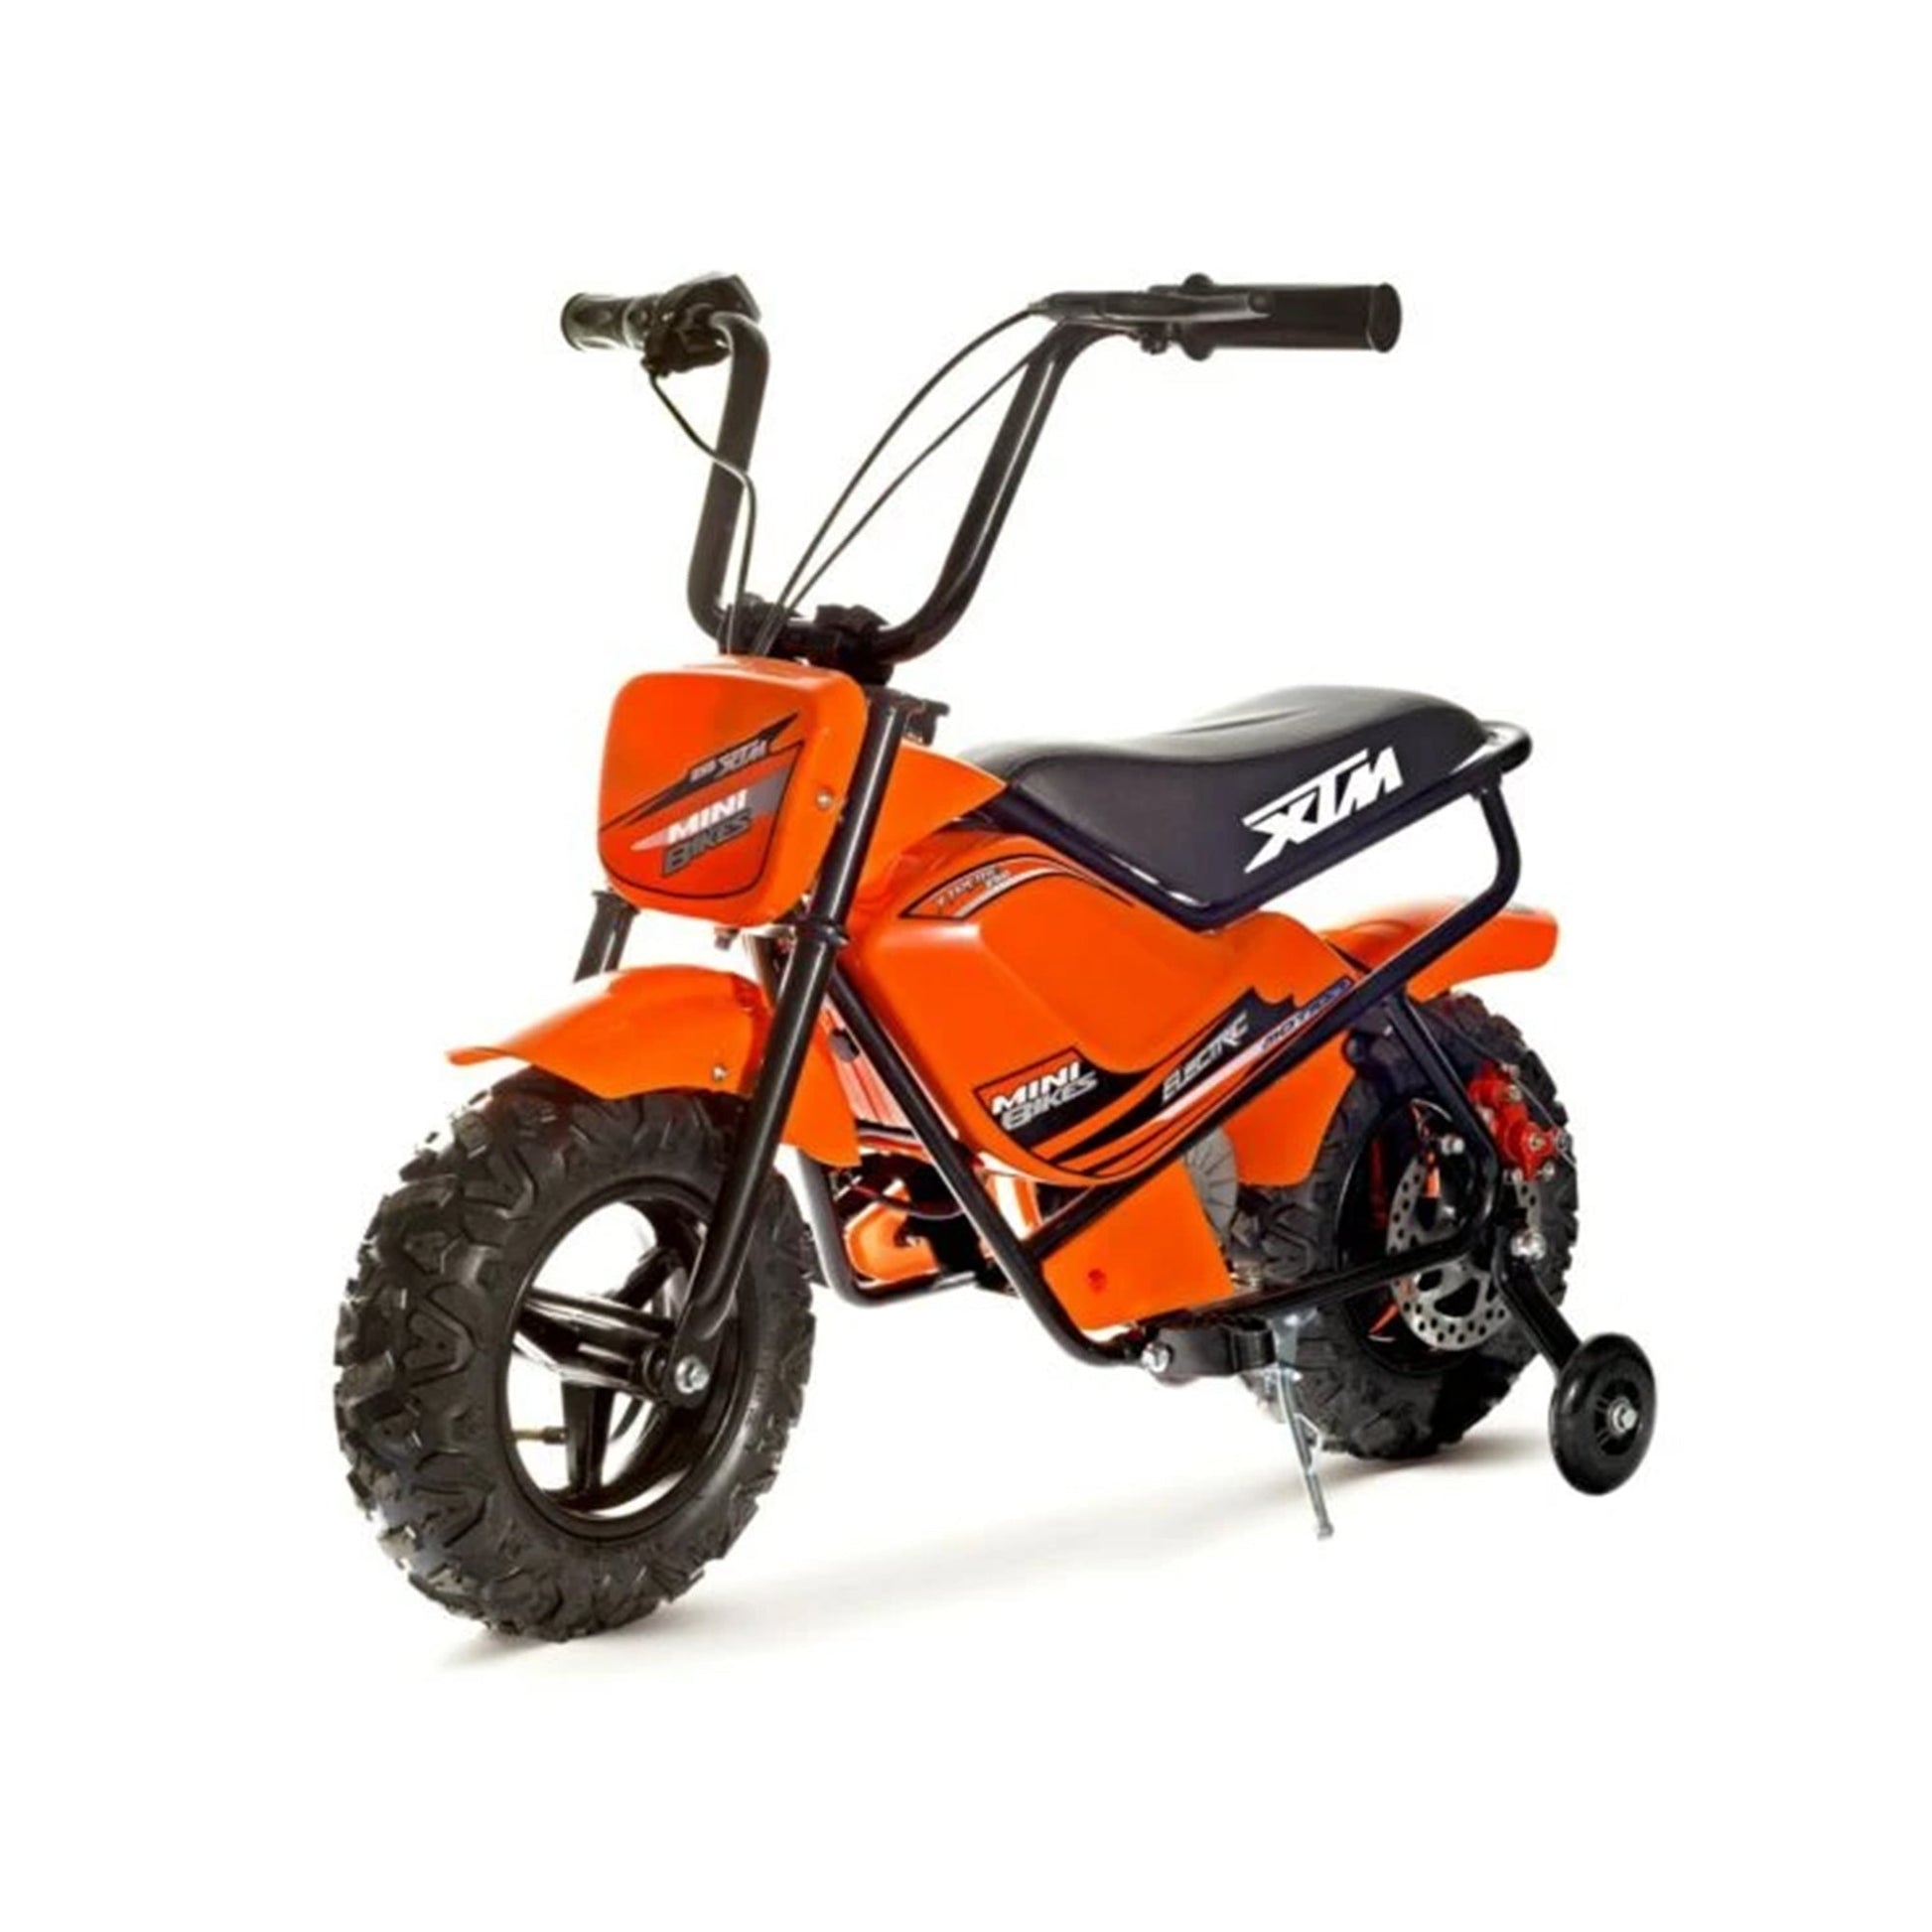 "Small orange electric ride-on dirt bike for kids on a white background, equipped with a twist and go throttle."